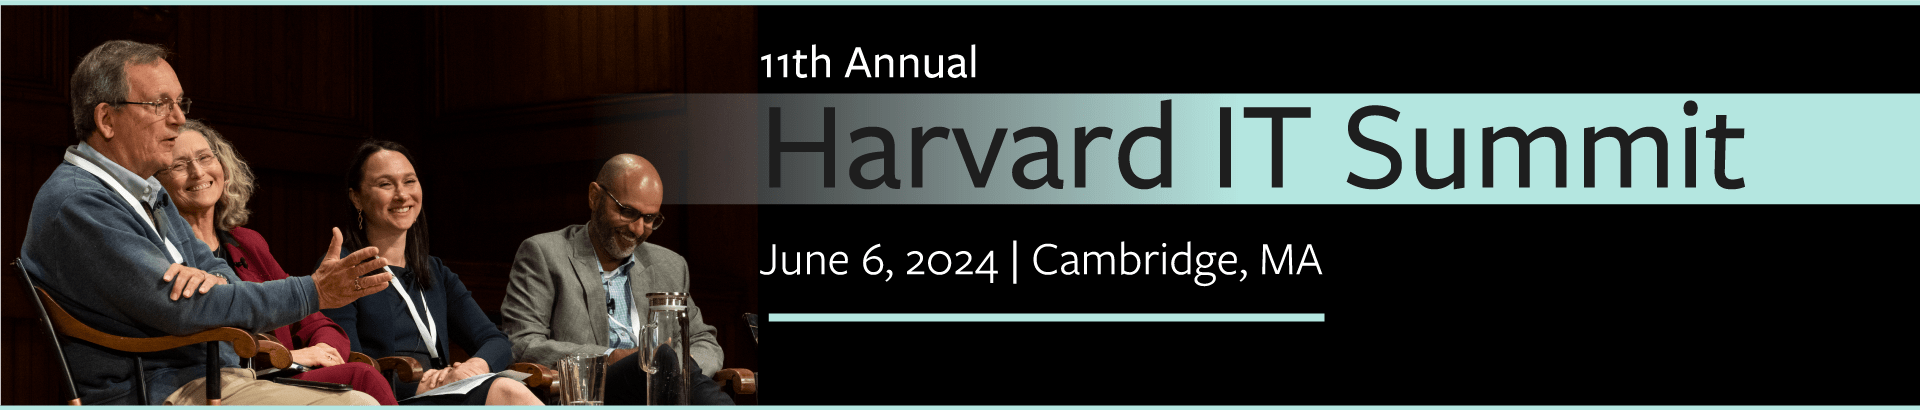 Join us for the Harvard IT Summit on June 6, 2024 in Cambridge, MA